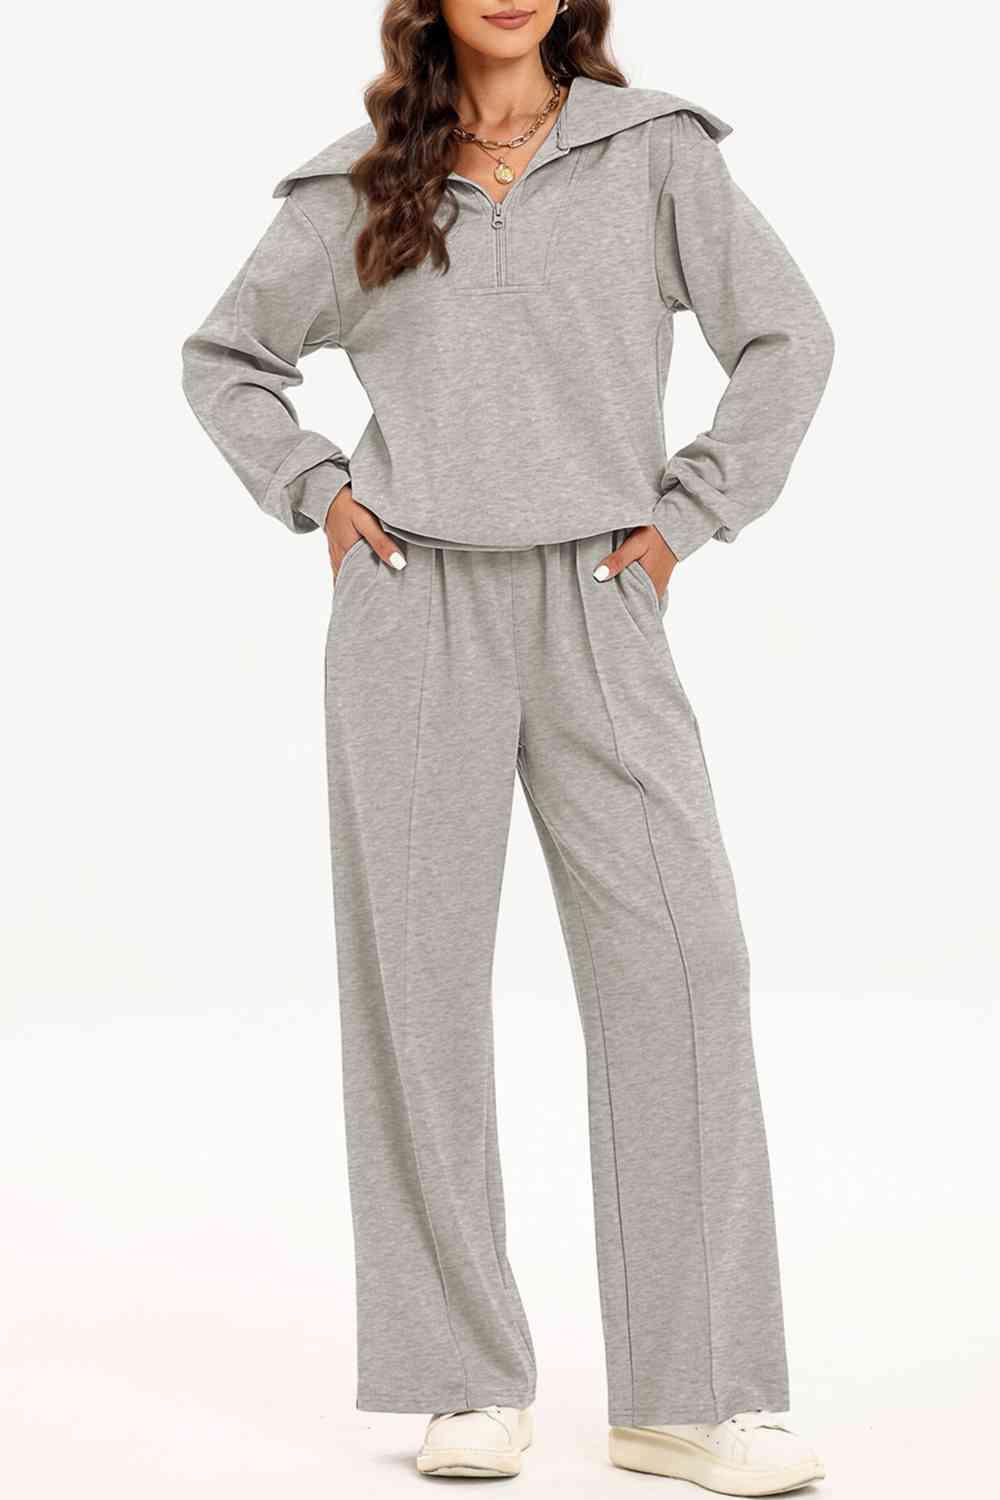 a woman wearing a grey hoodie and pants